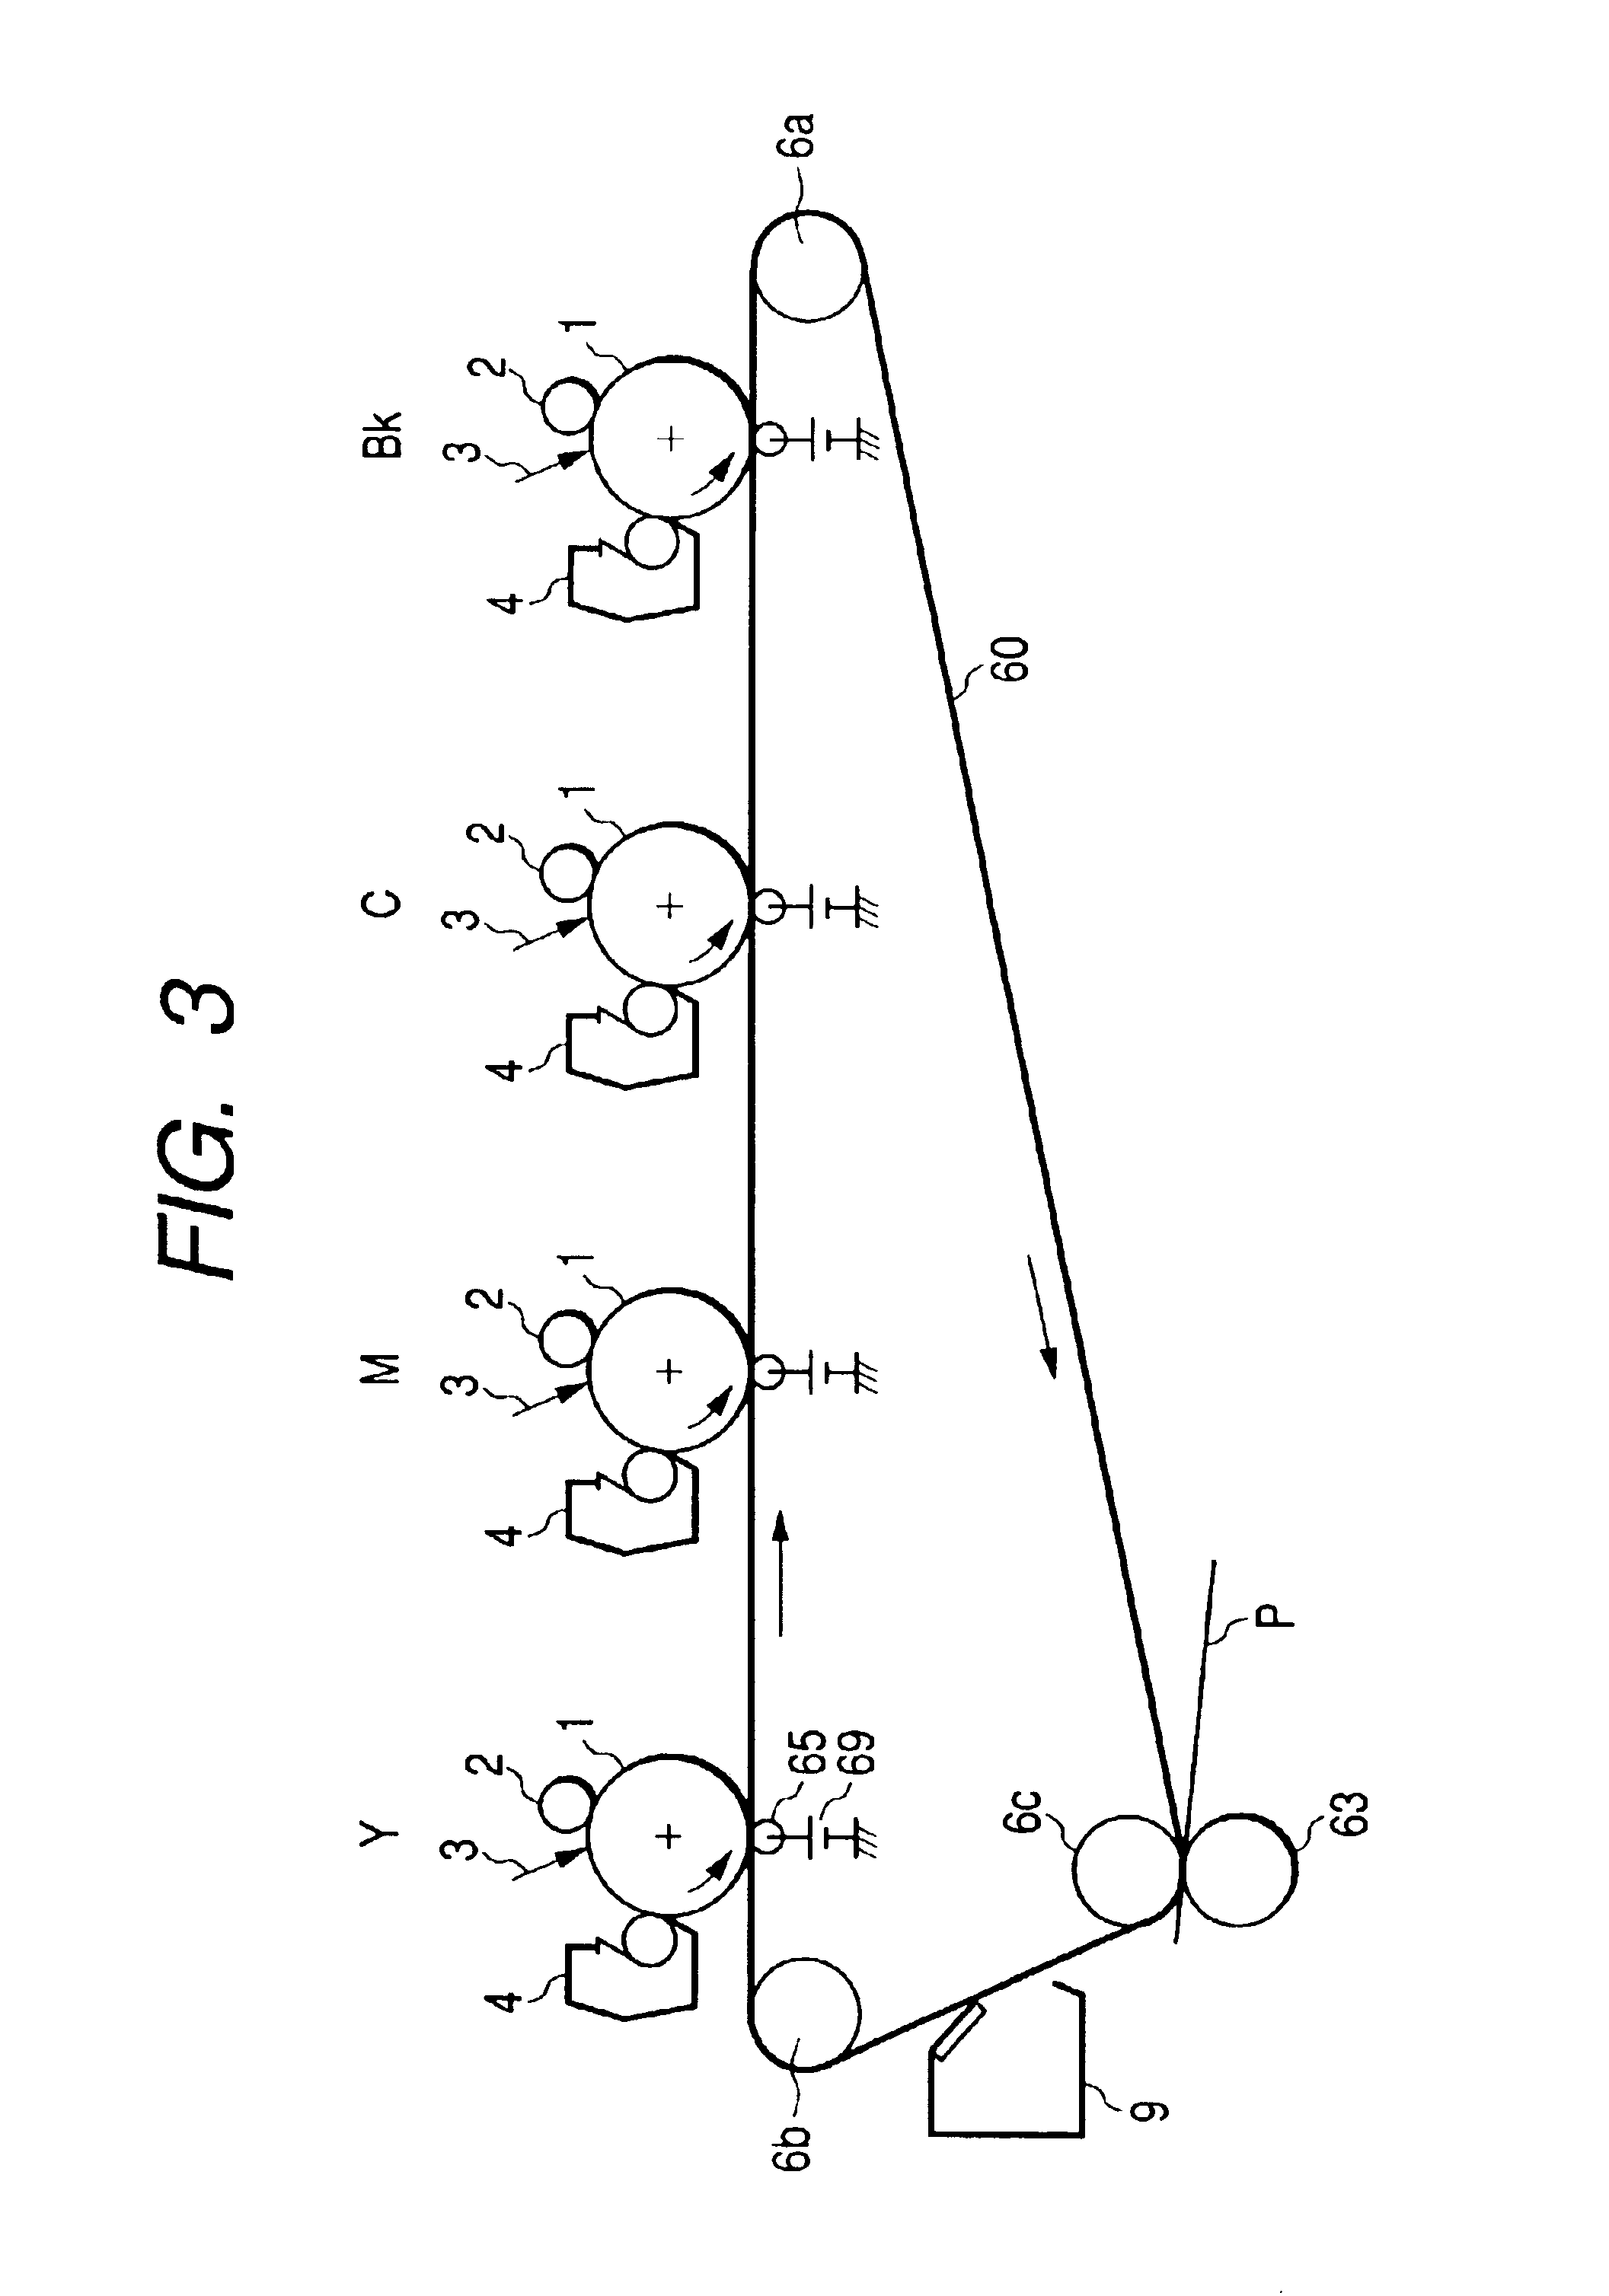 Full-color image-forming method, and two-component developer kit for forming full-color images